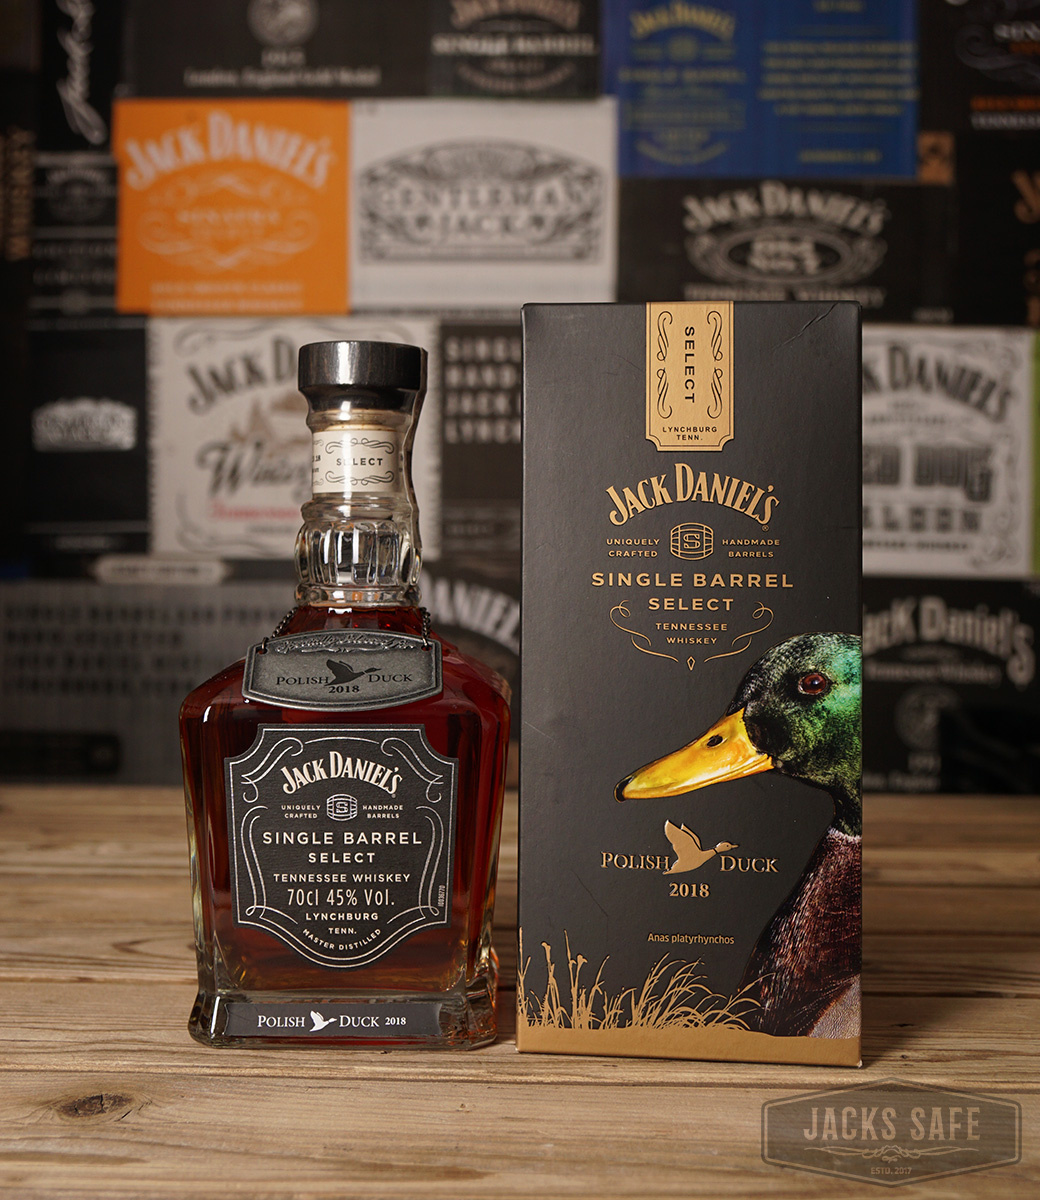 JACK DANIEL'S - Single Barrel - Personal Collection - Polish DUCKS - SEVERAL YEARS - SEE DROP DOWN